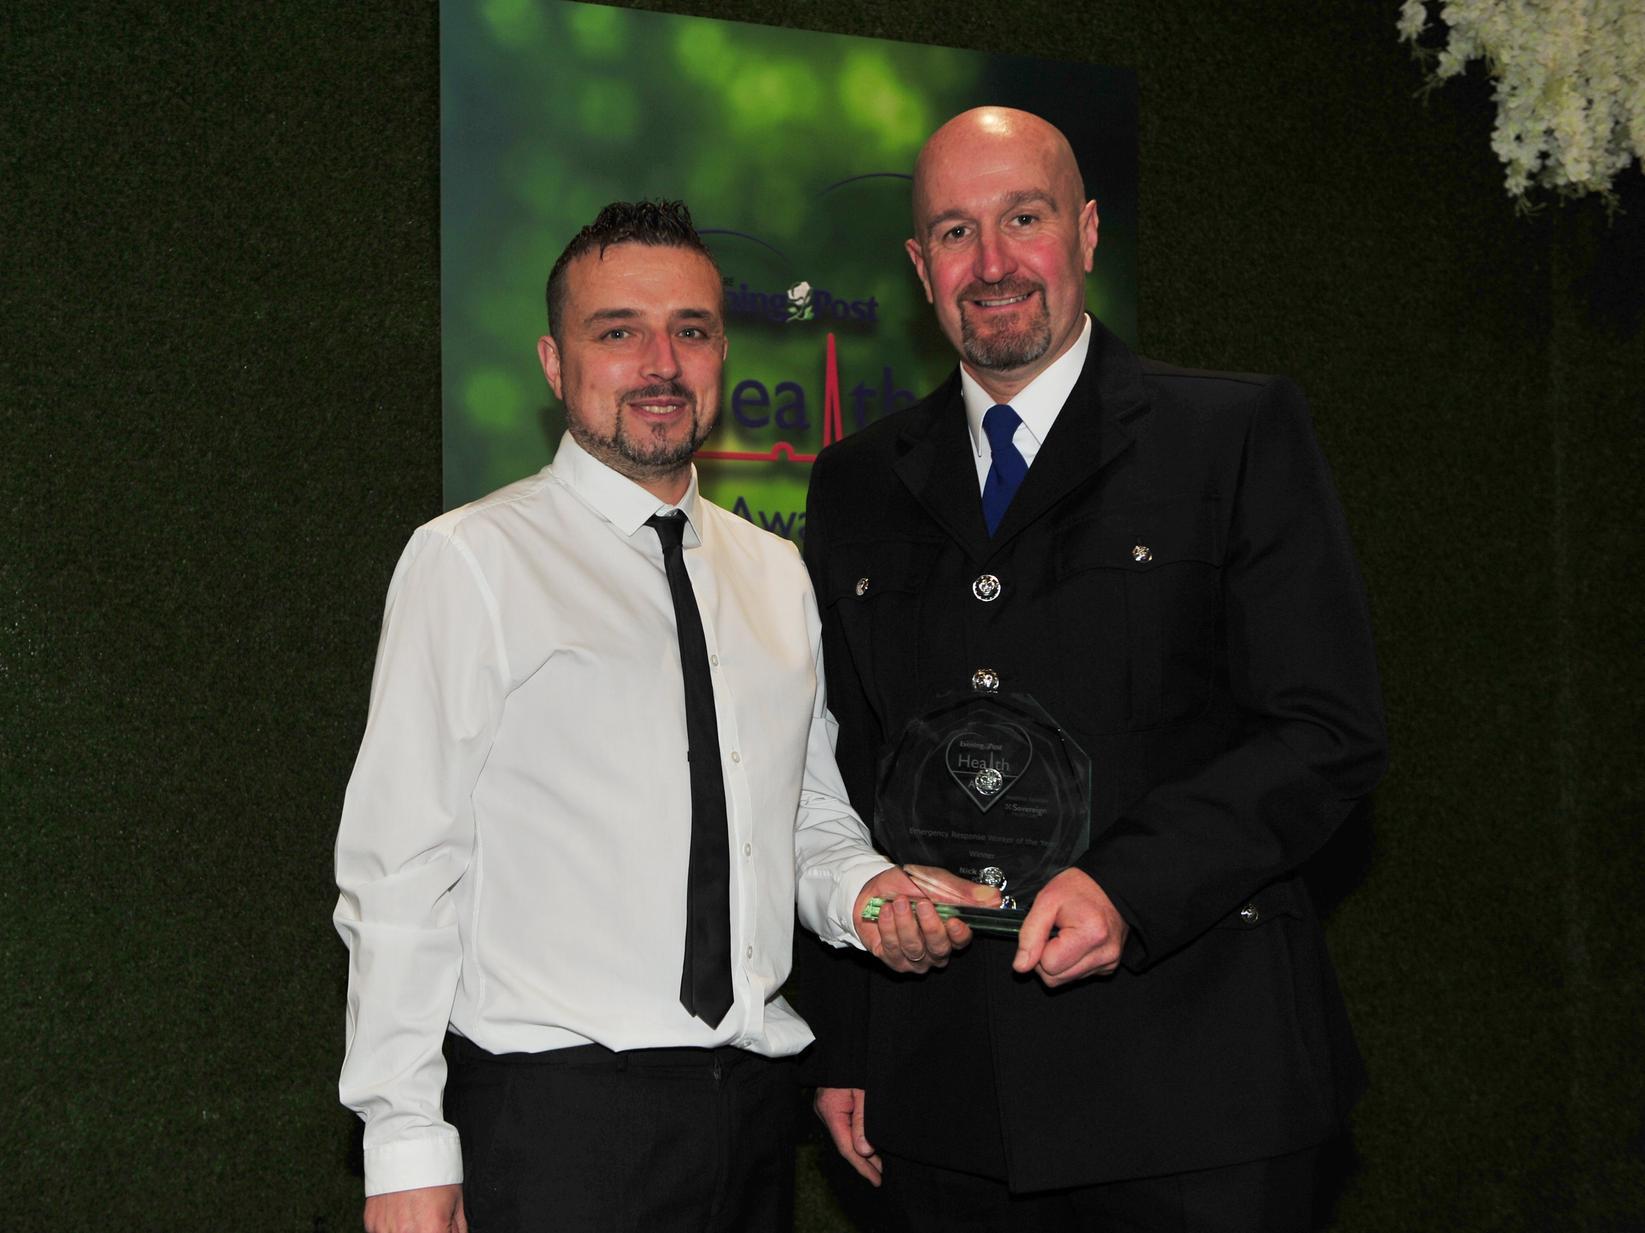 PCSO Nick Smith, (pictured right) of the Leeds District policing Team, wins the Emergency Response Worker of the Year, after saving a man's life who was going to jump from a motorway bridge in south Leeds.